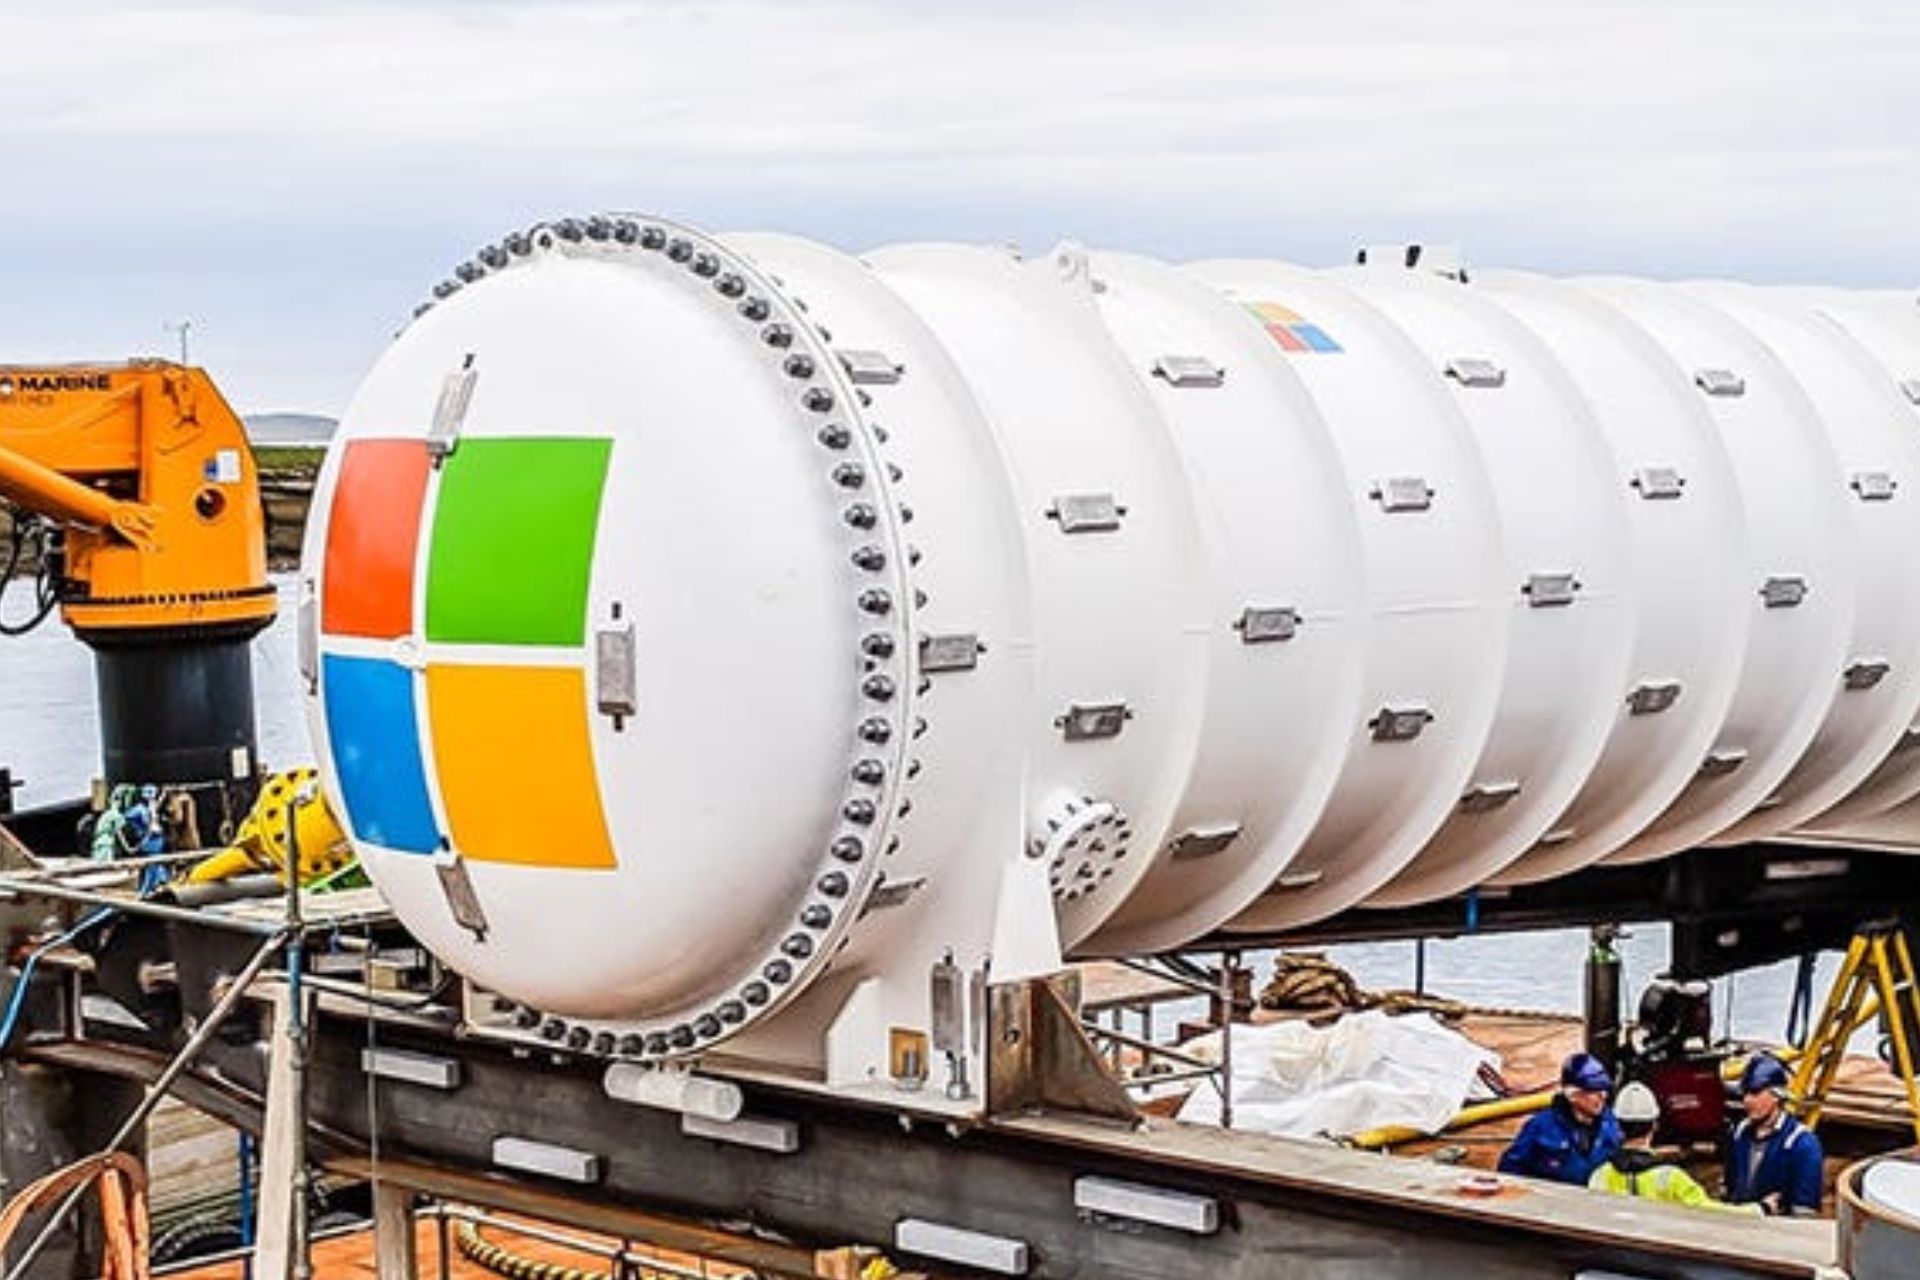 Microsoft closes its underwater data center 'Project Natick' after 11 years